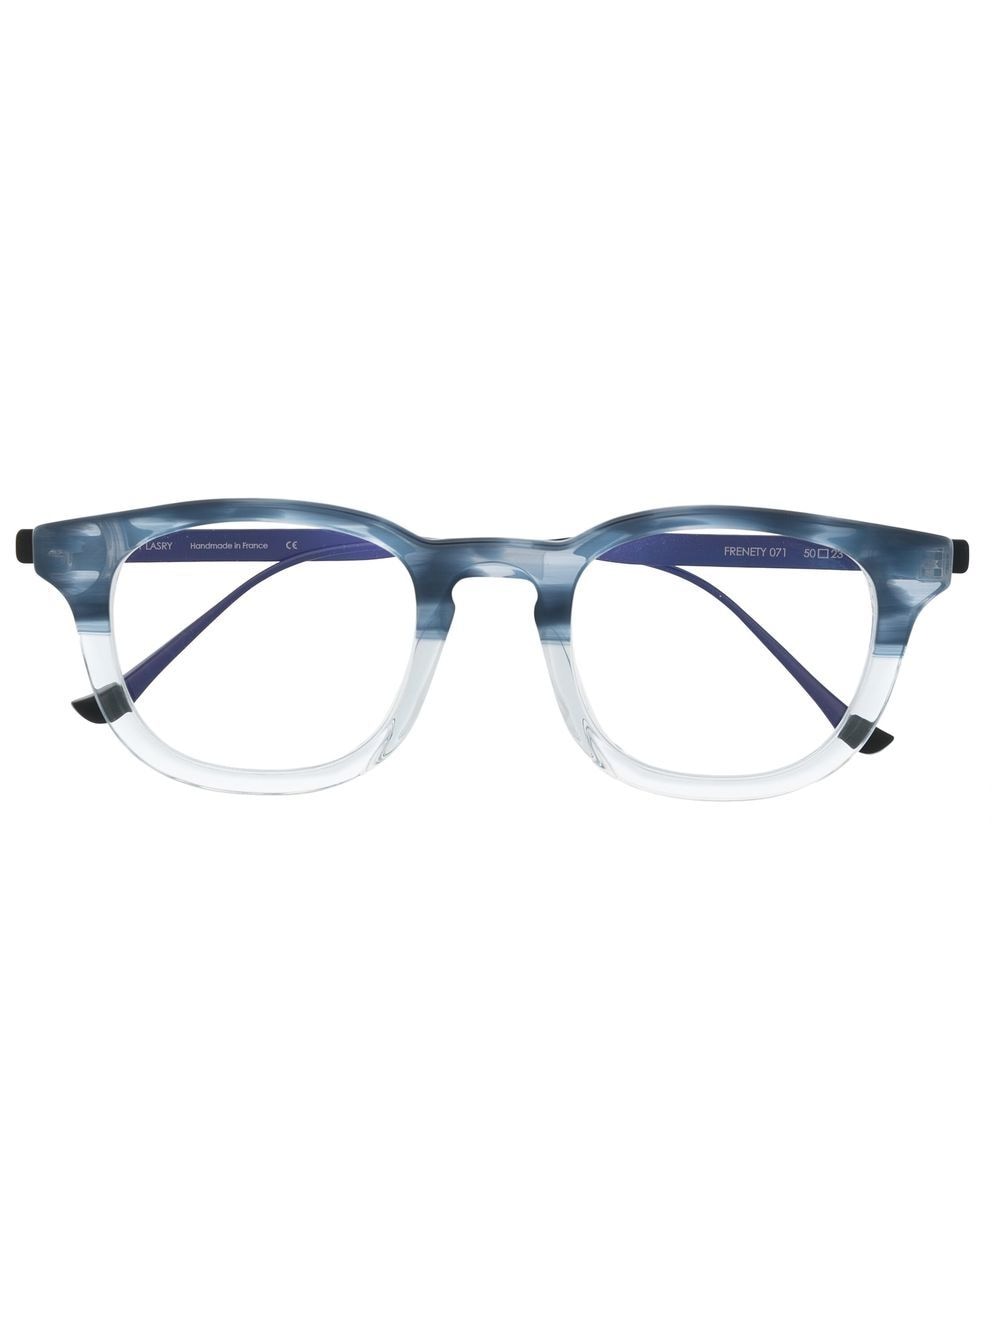 Thierry Lasry Frenety optical glasses - Blue von Thierry Lasry